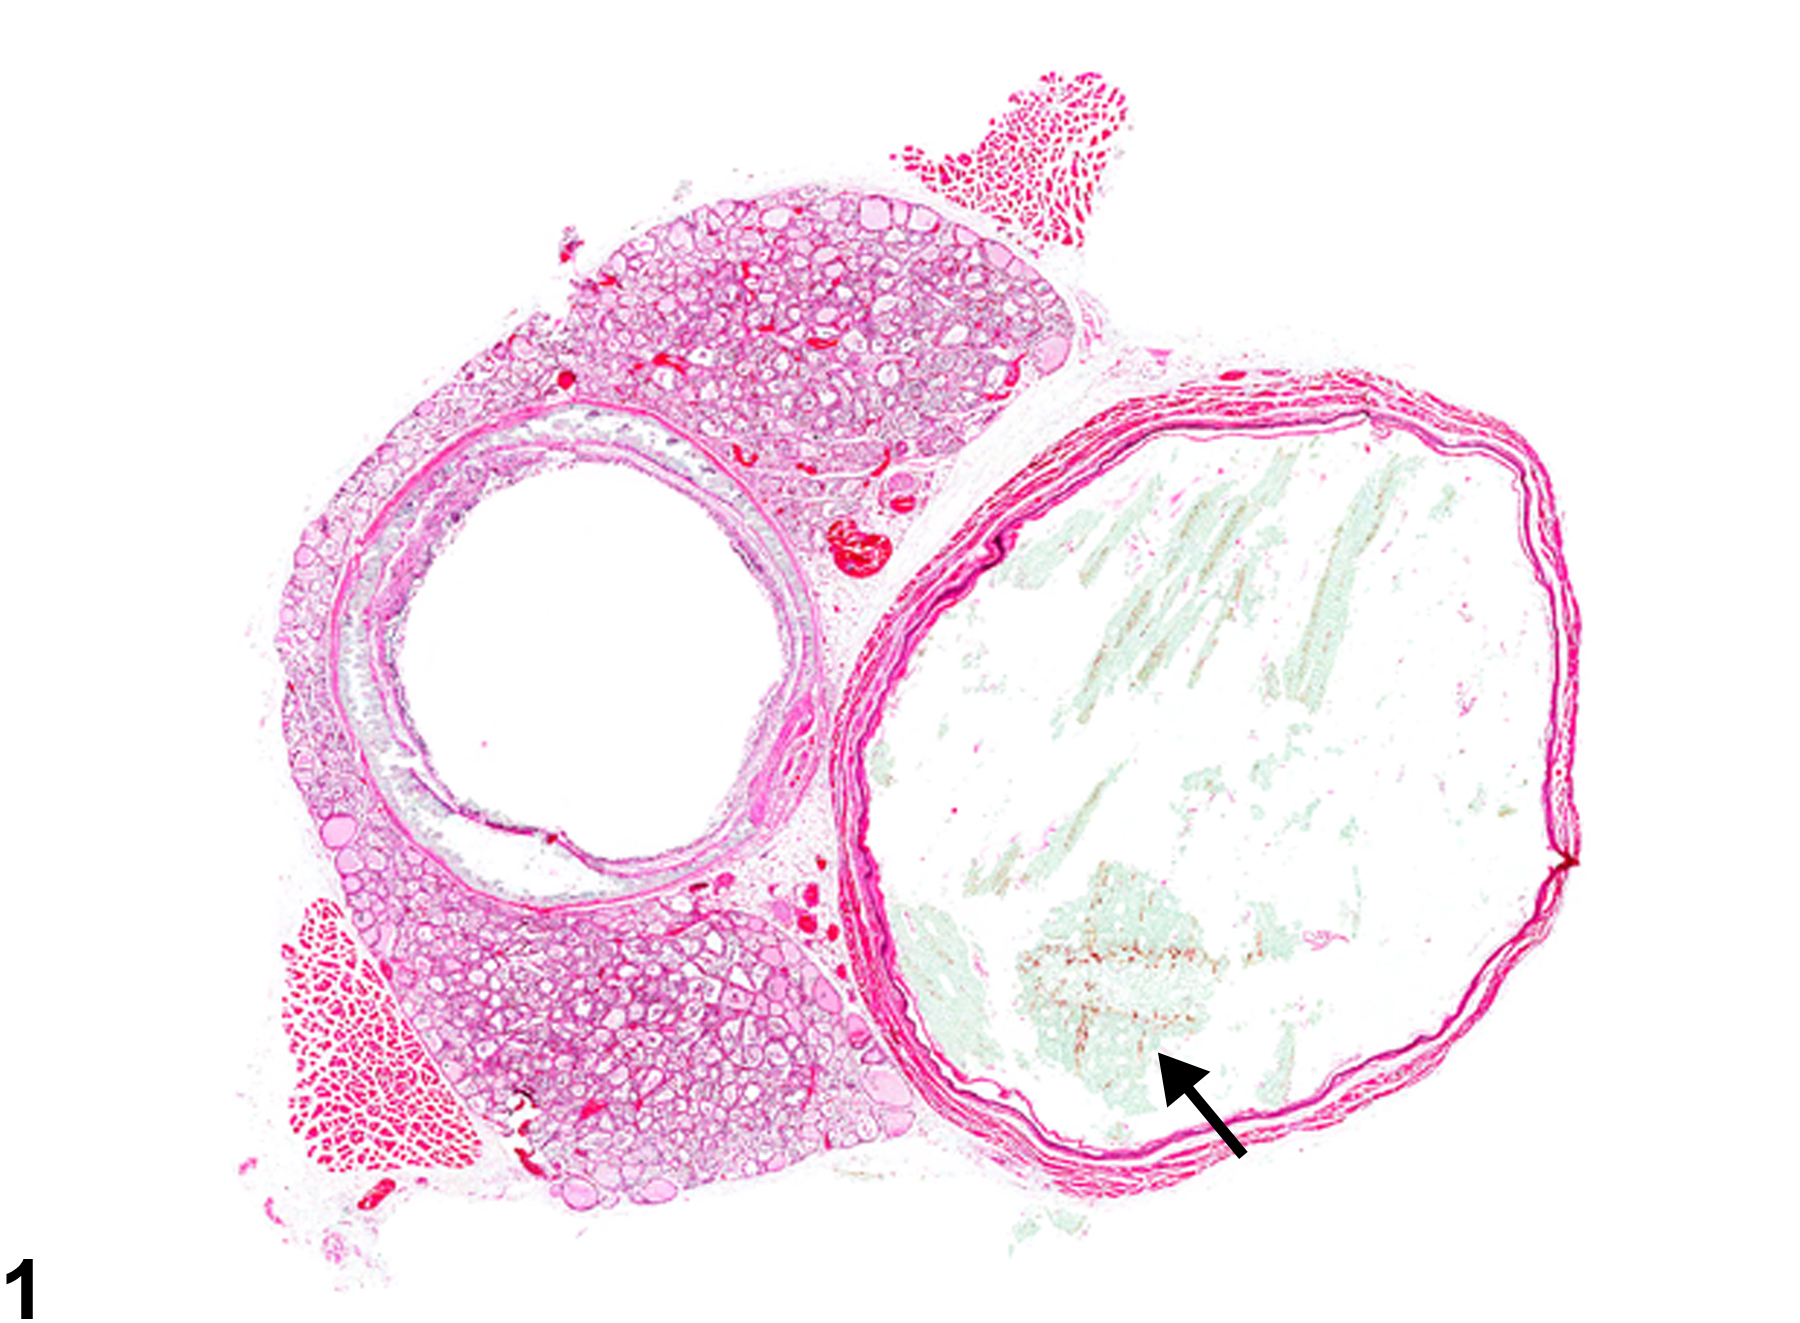 Image of dilation in the esophagus from a male Wistar Han rat in a chronic study